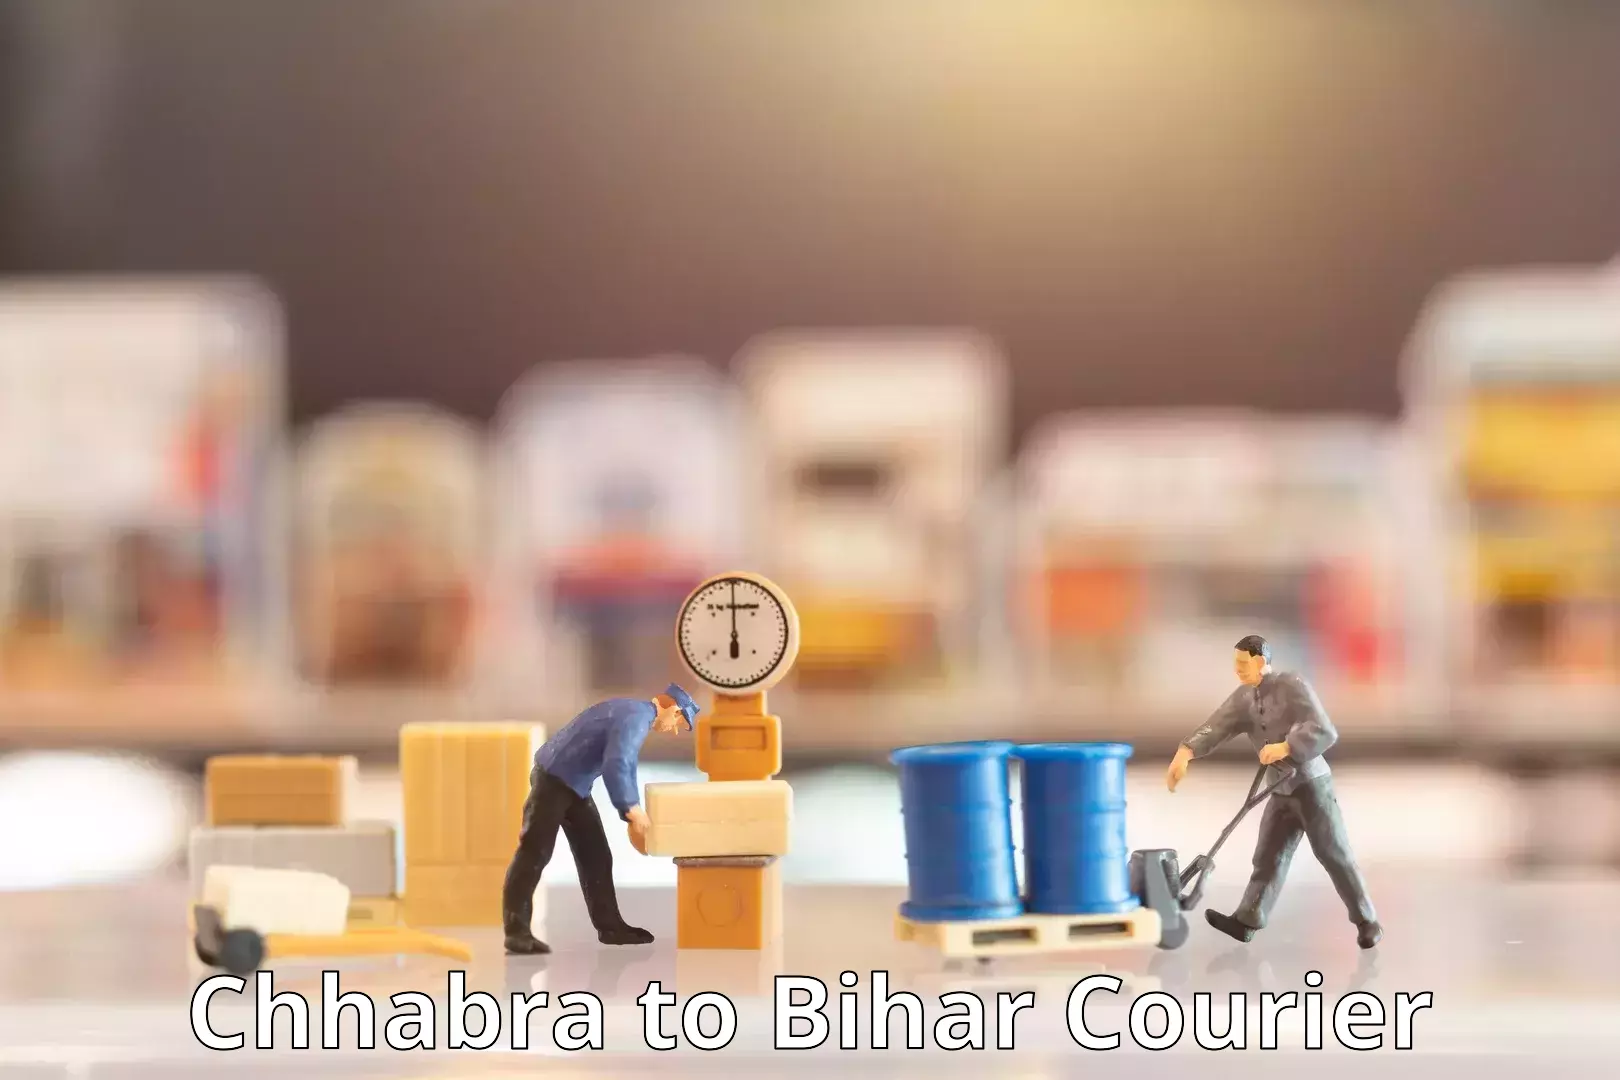 Global courier networks Chhabra to Bihar